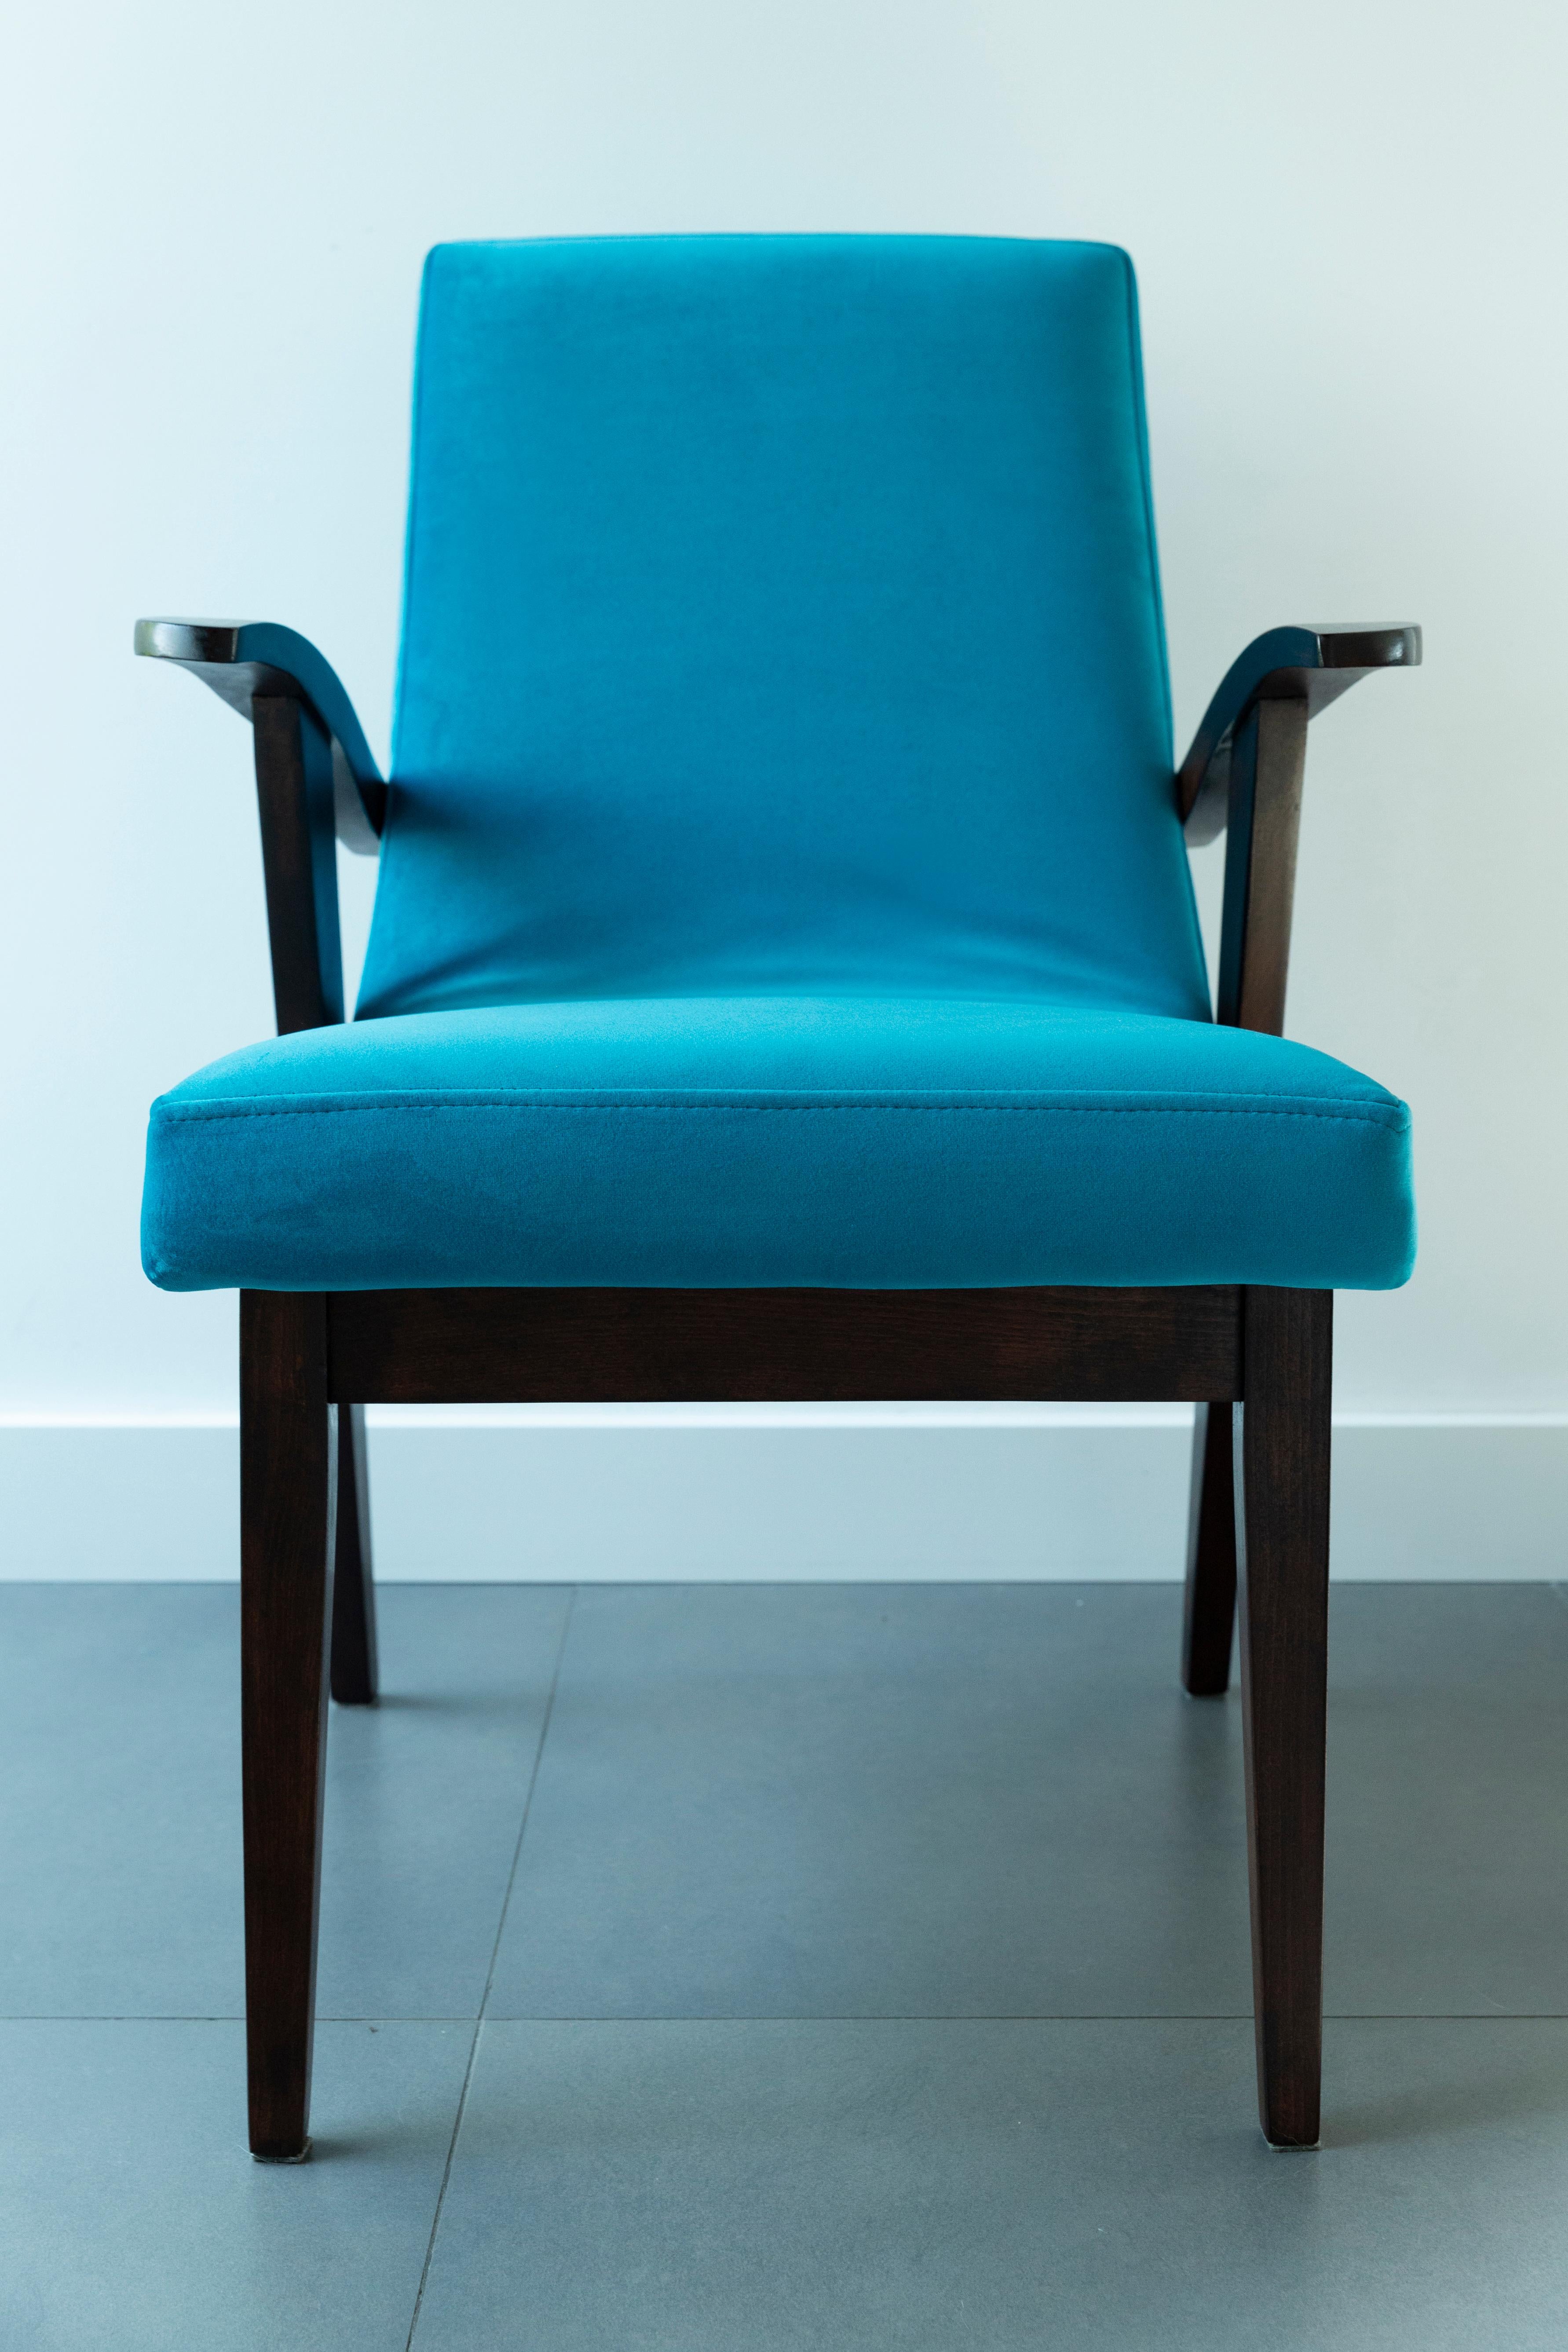 Set of Four Vintage Chairs in Blue Velvet by Mieczyslaw Puchala, 1960s For Sale 5